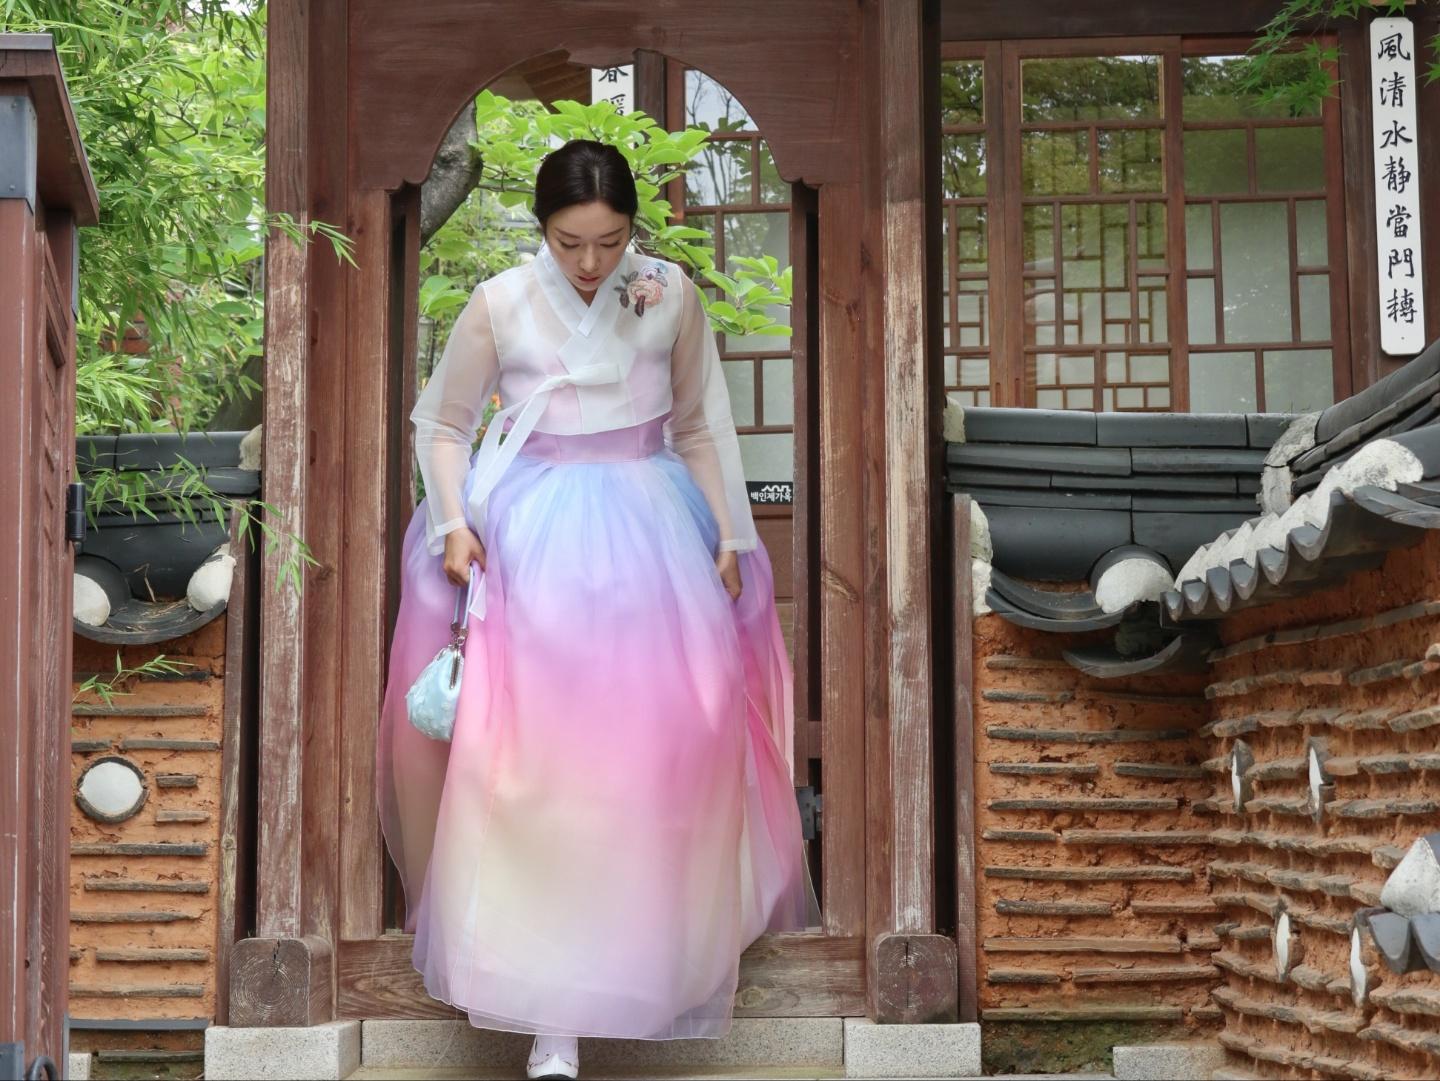 Two women wearing traditional Korean hanbok standing outside a rental shop. One is wearing a purple outerwear and the other a pink one-piece dress with plant patterns. The shop's entrance door can be seen in the background.